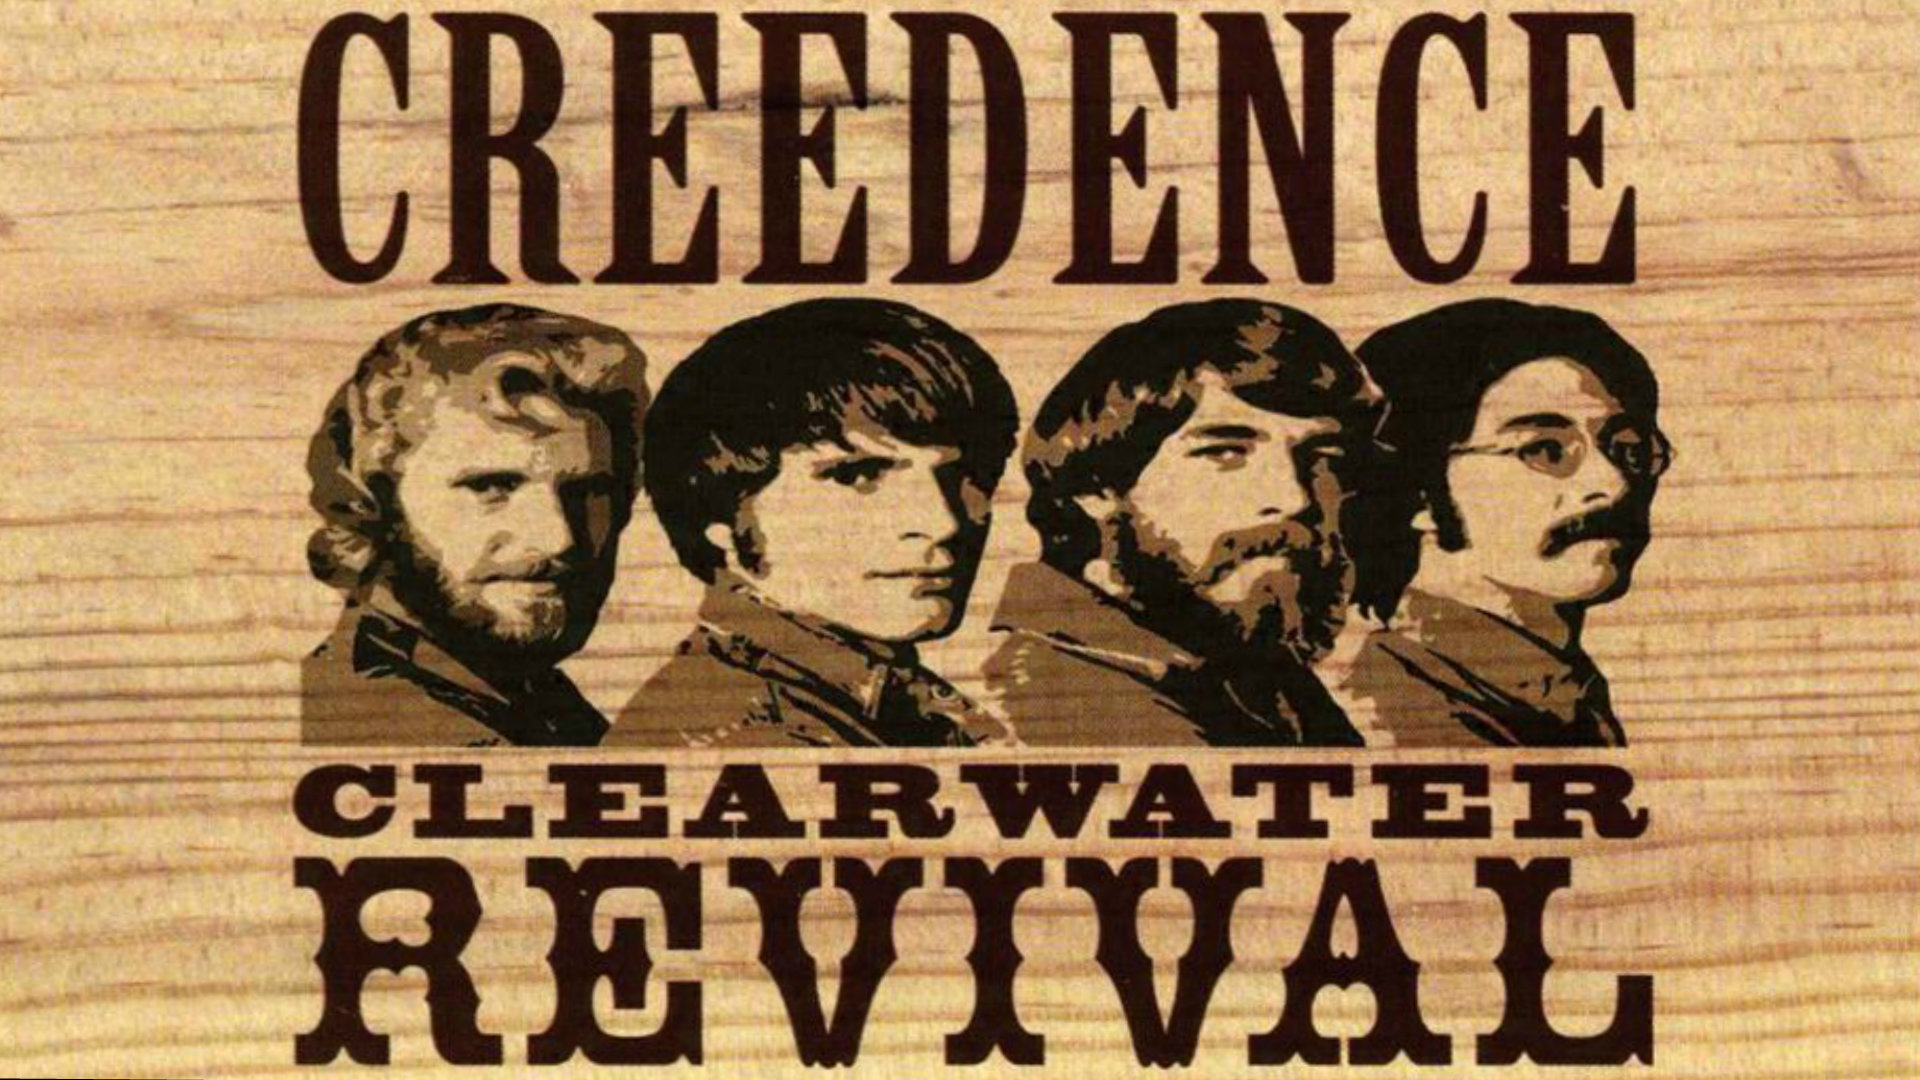 Creedence Clearwater Revival Wallpaper HD For Desktop Background